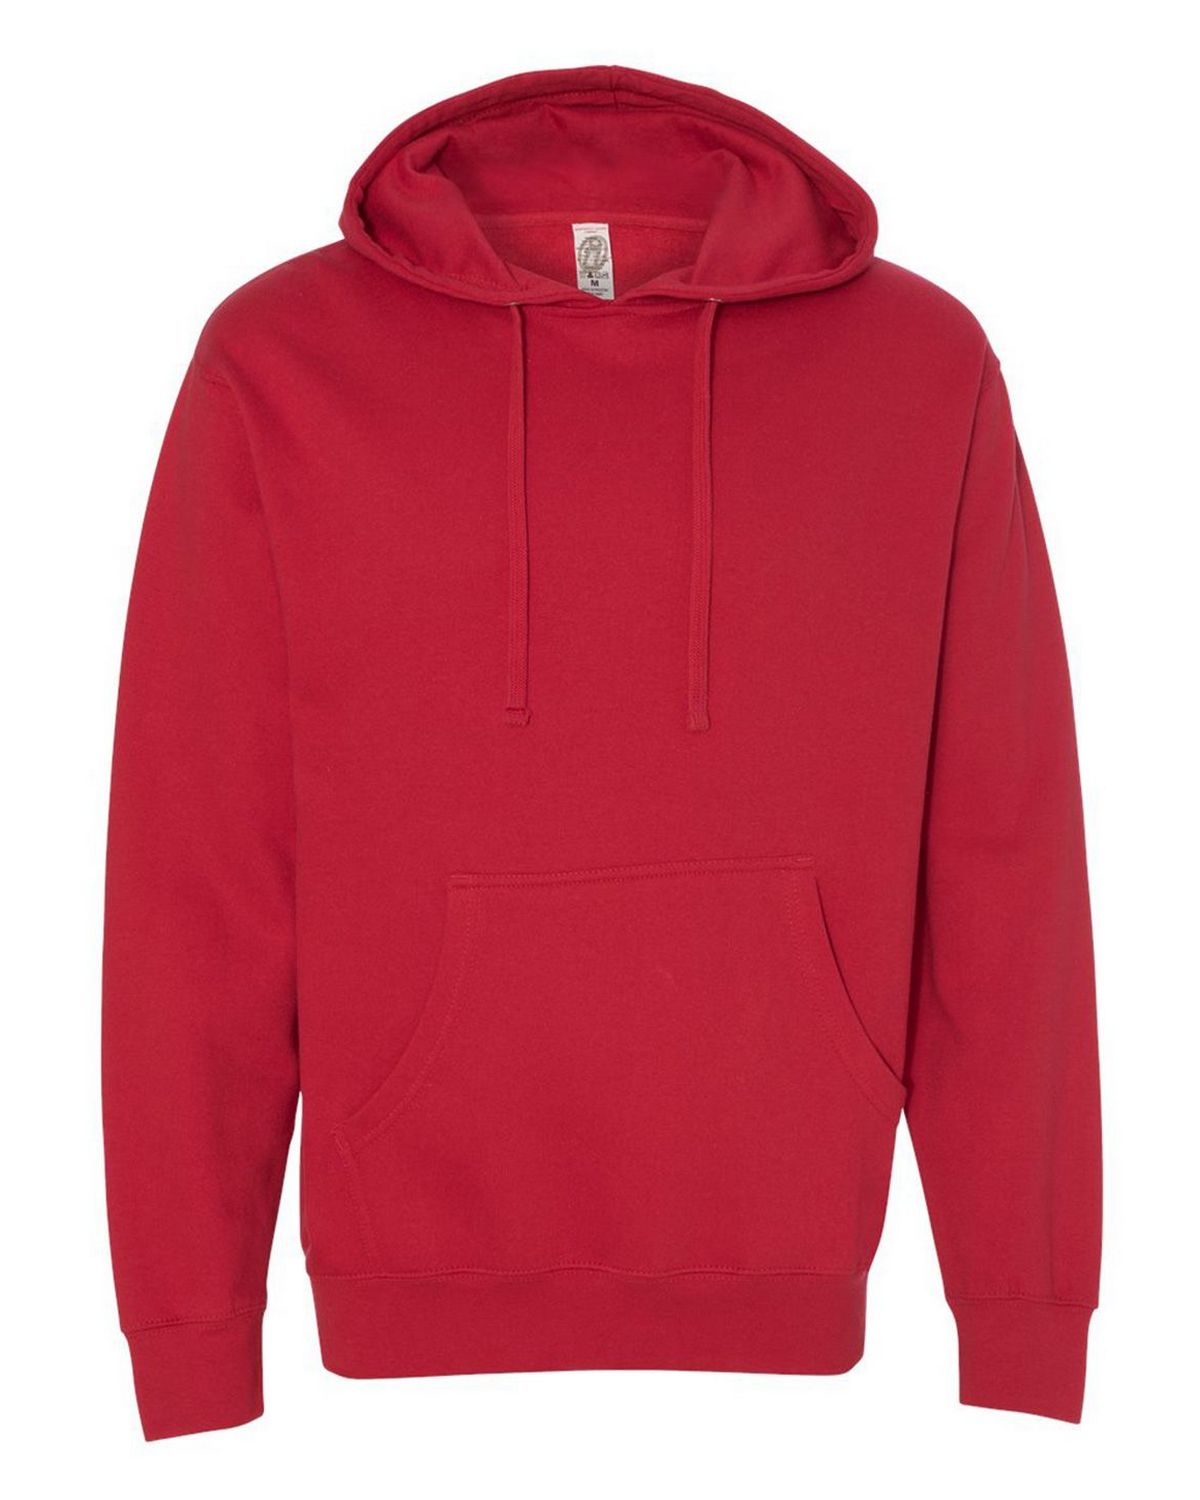 Independent Trading Co. SS4500 Mens Midweight Hooded Pullover Sweatshirt